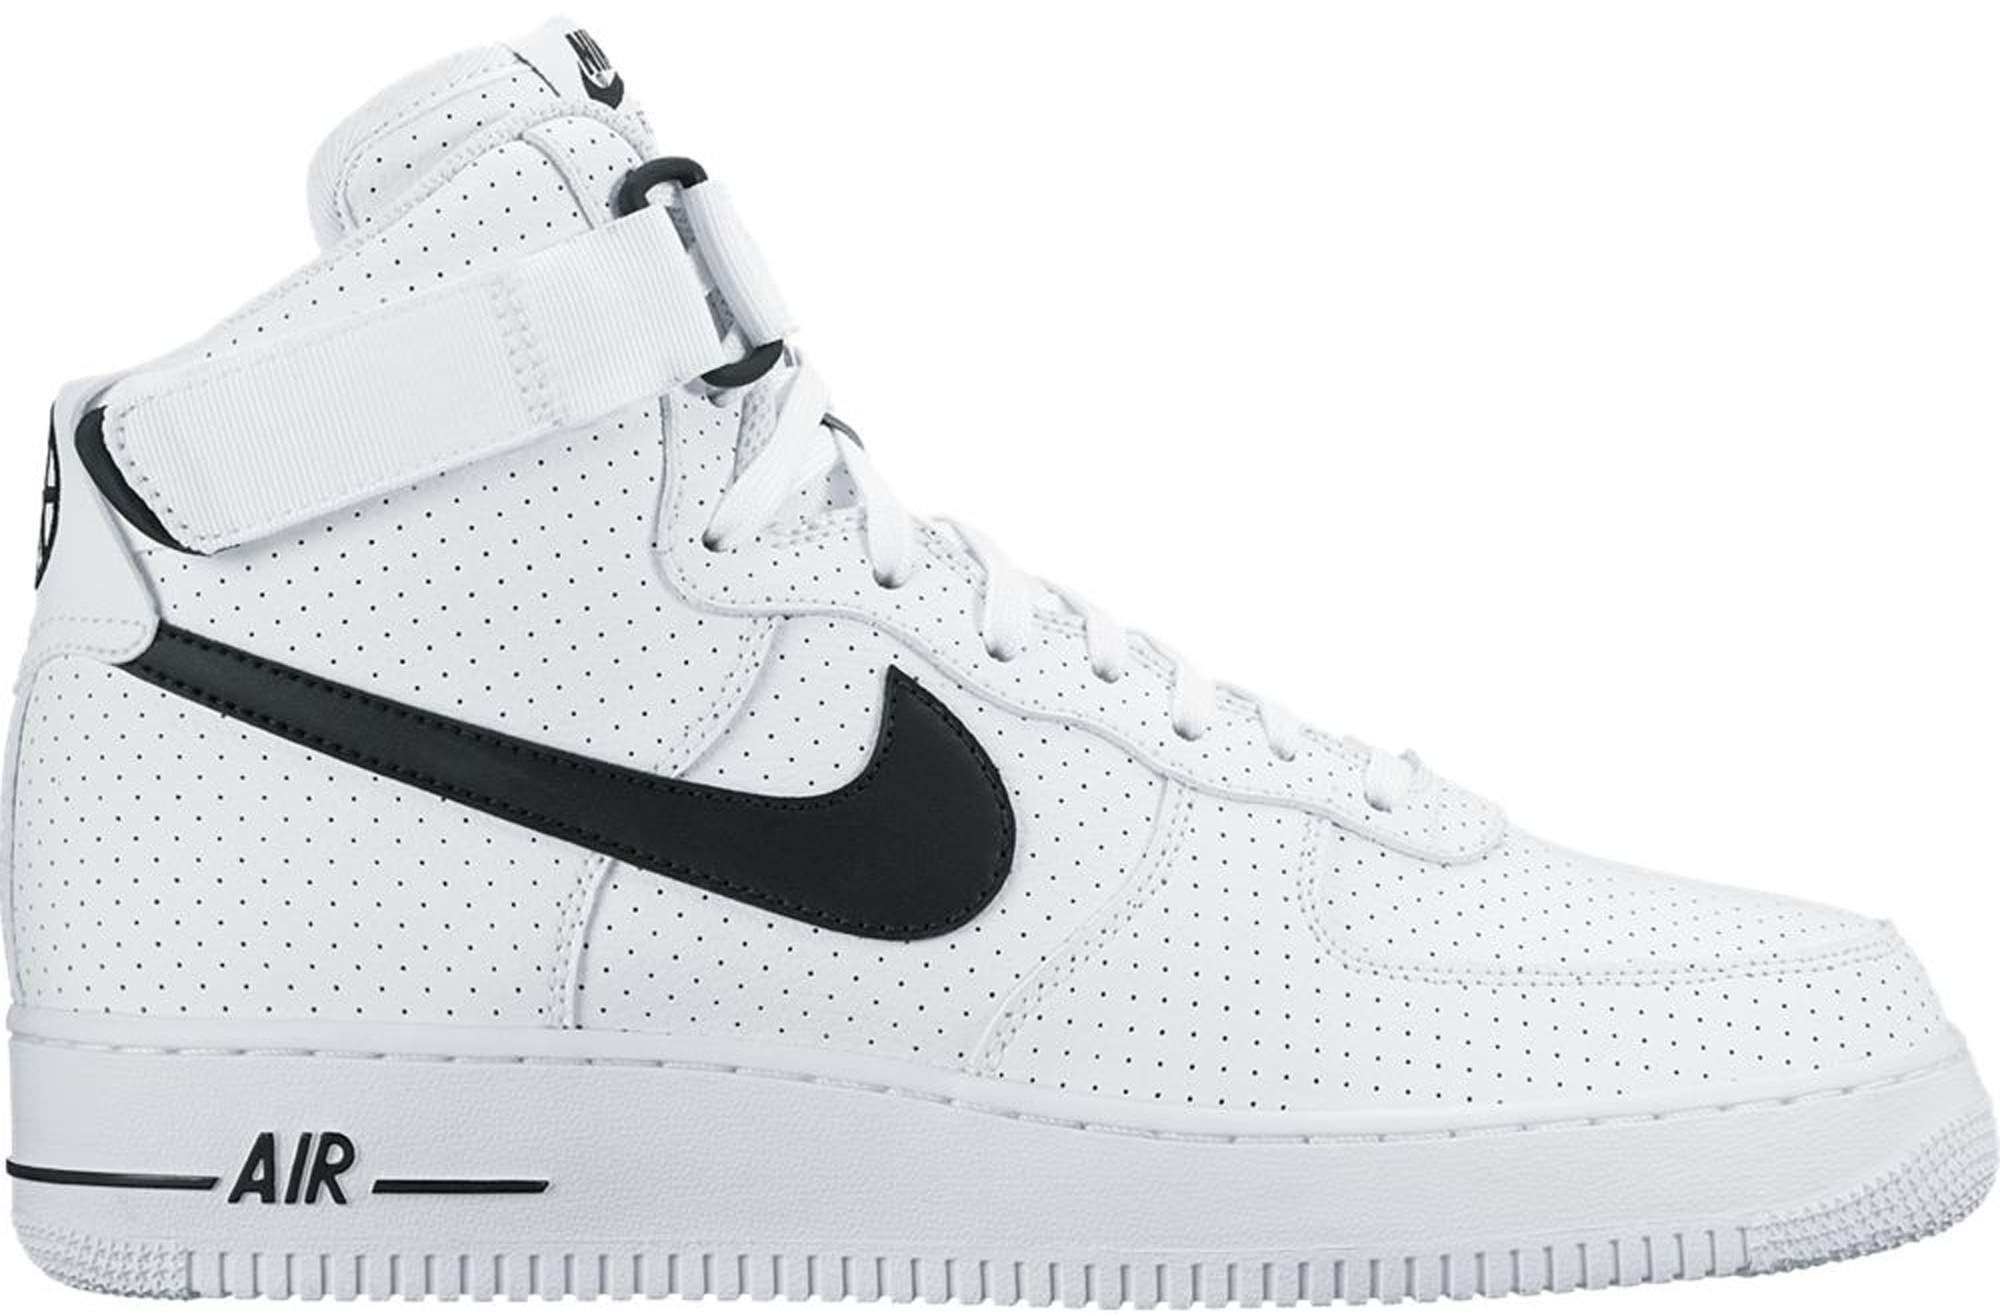 air force 1 high black and white